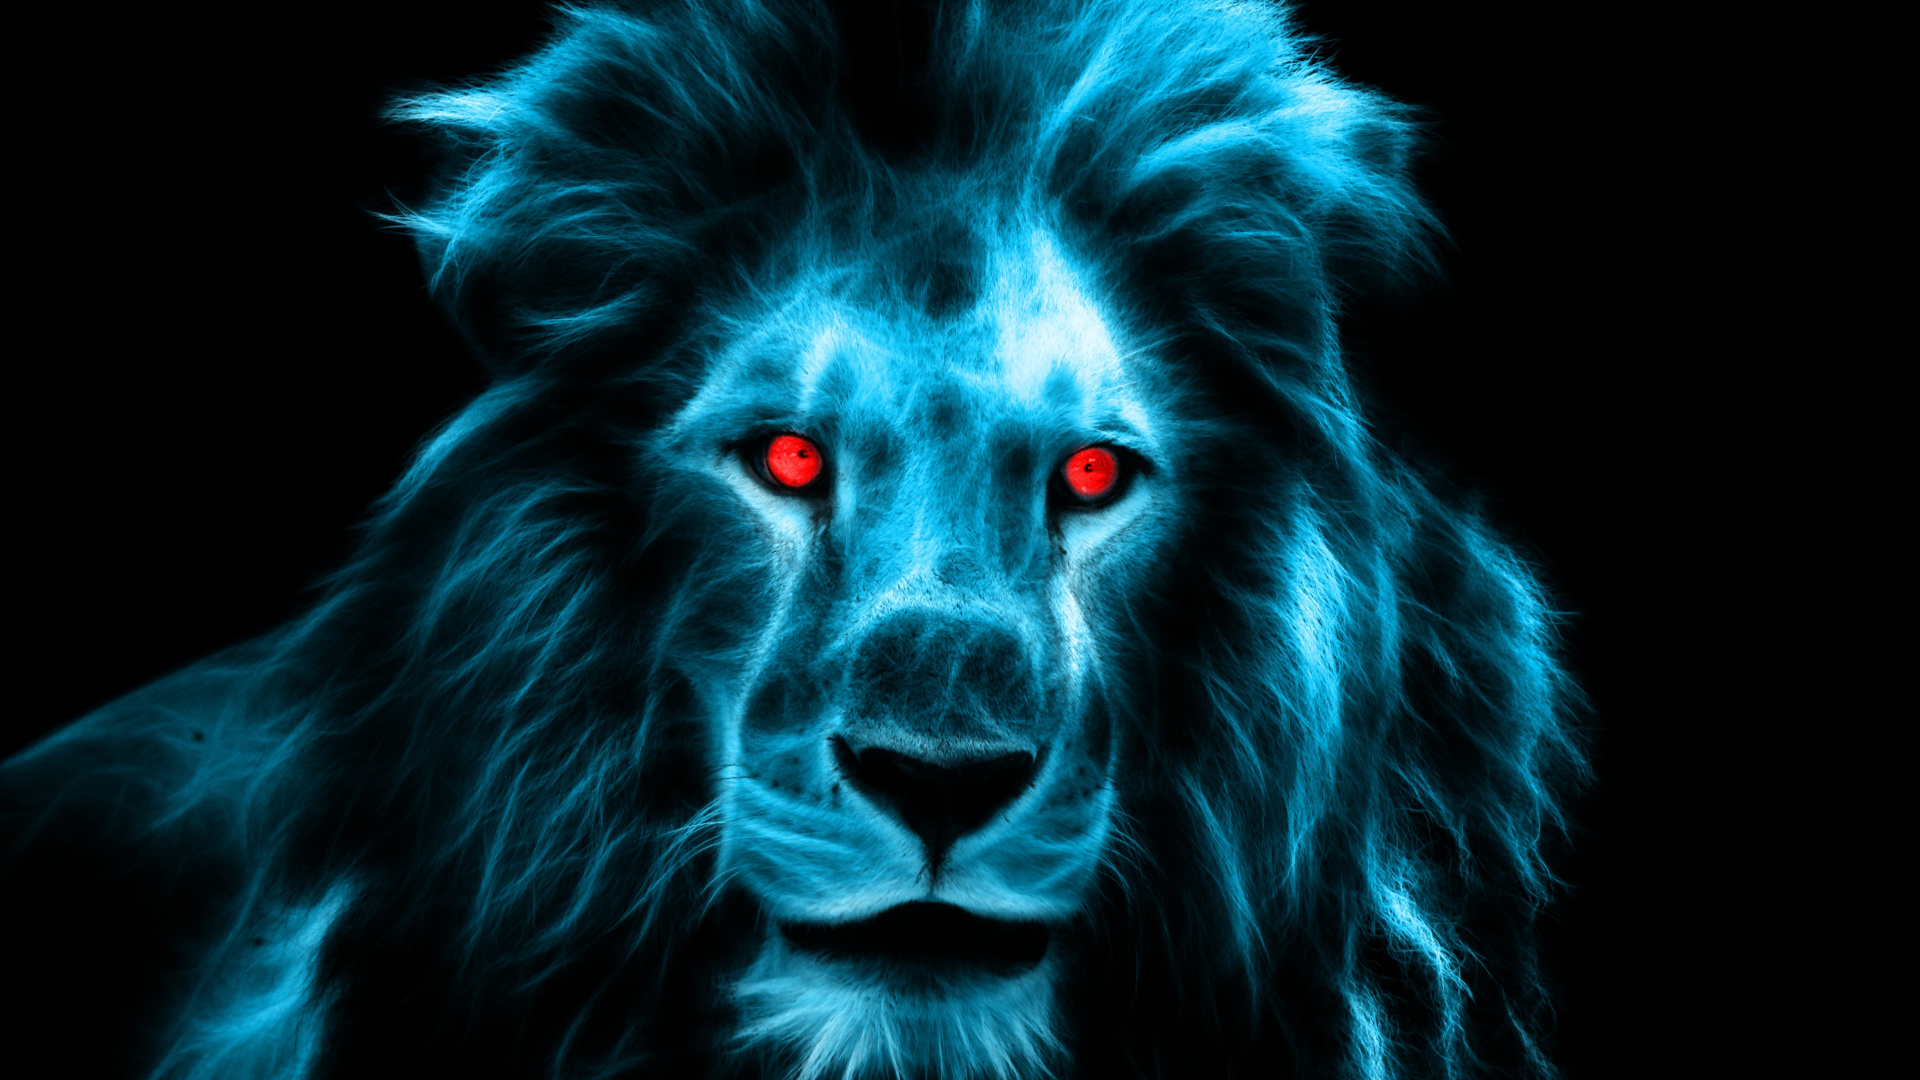 Lion With Blue Eyes Illustration. Wallpaper in 1920x1080 Resolution